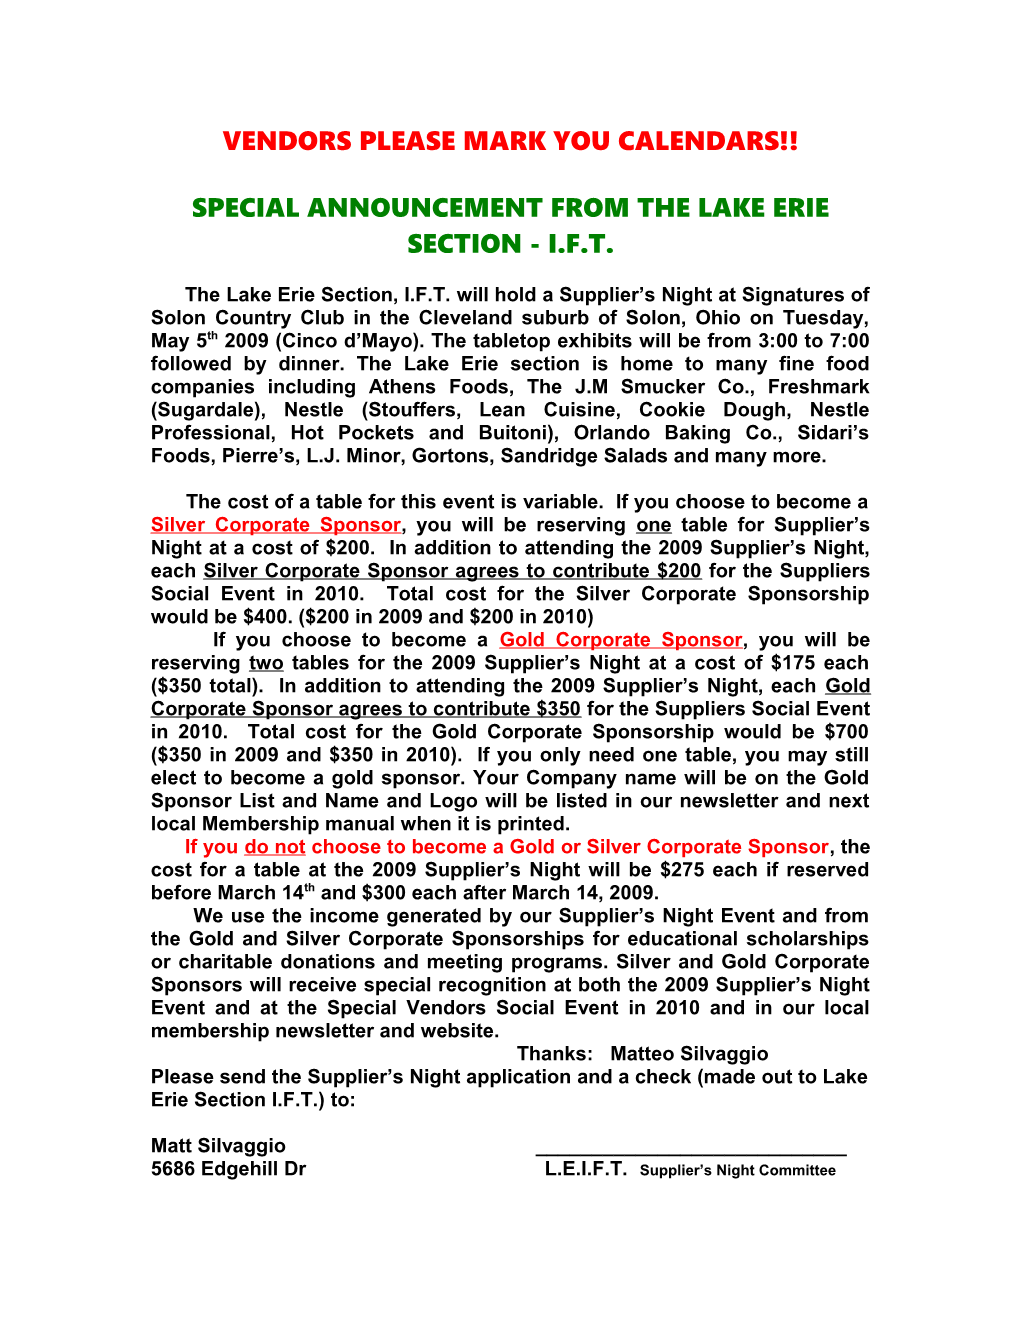 Special Announcement from the Lake Erie Section - I.F.T